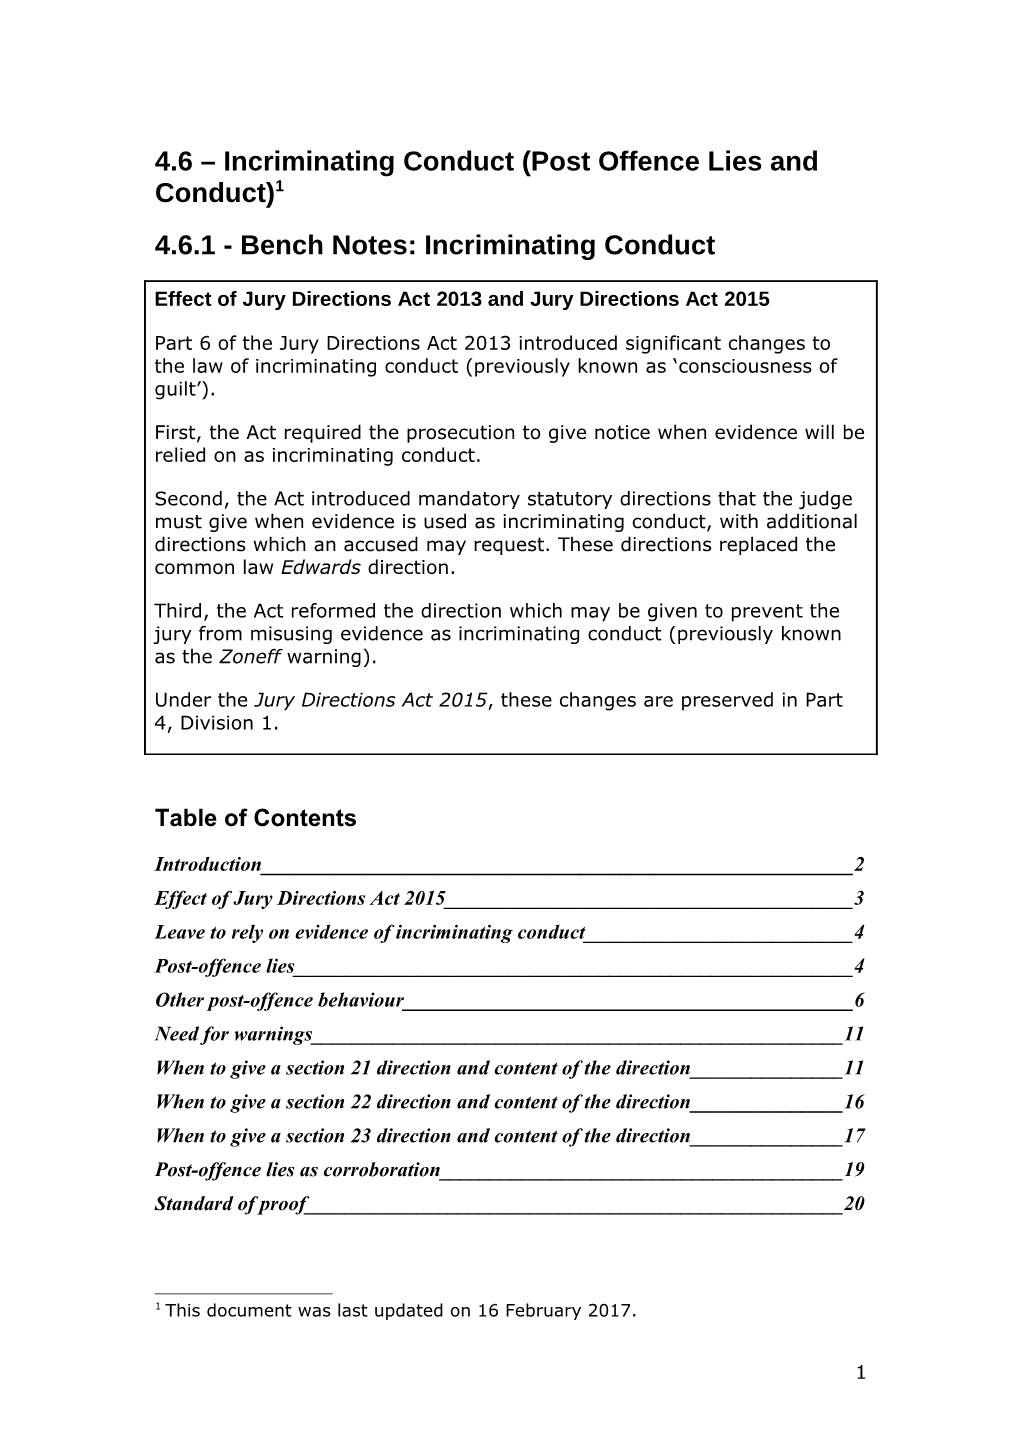 4.6.1 - Bench Notes: Incriminating Conduct